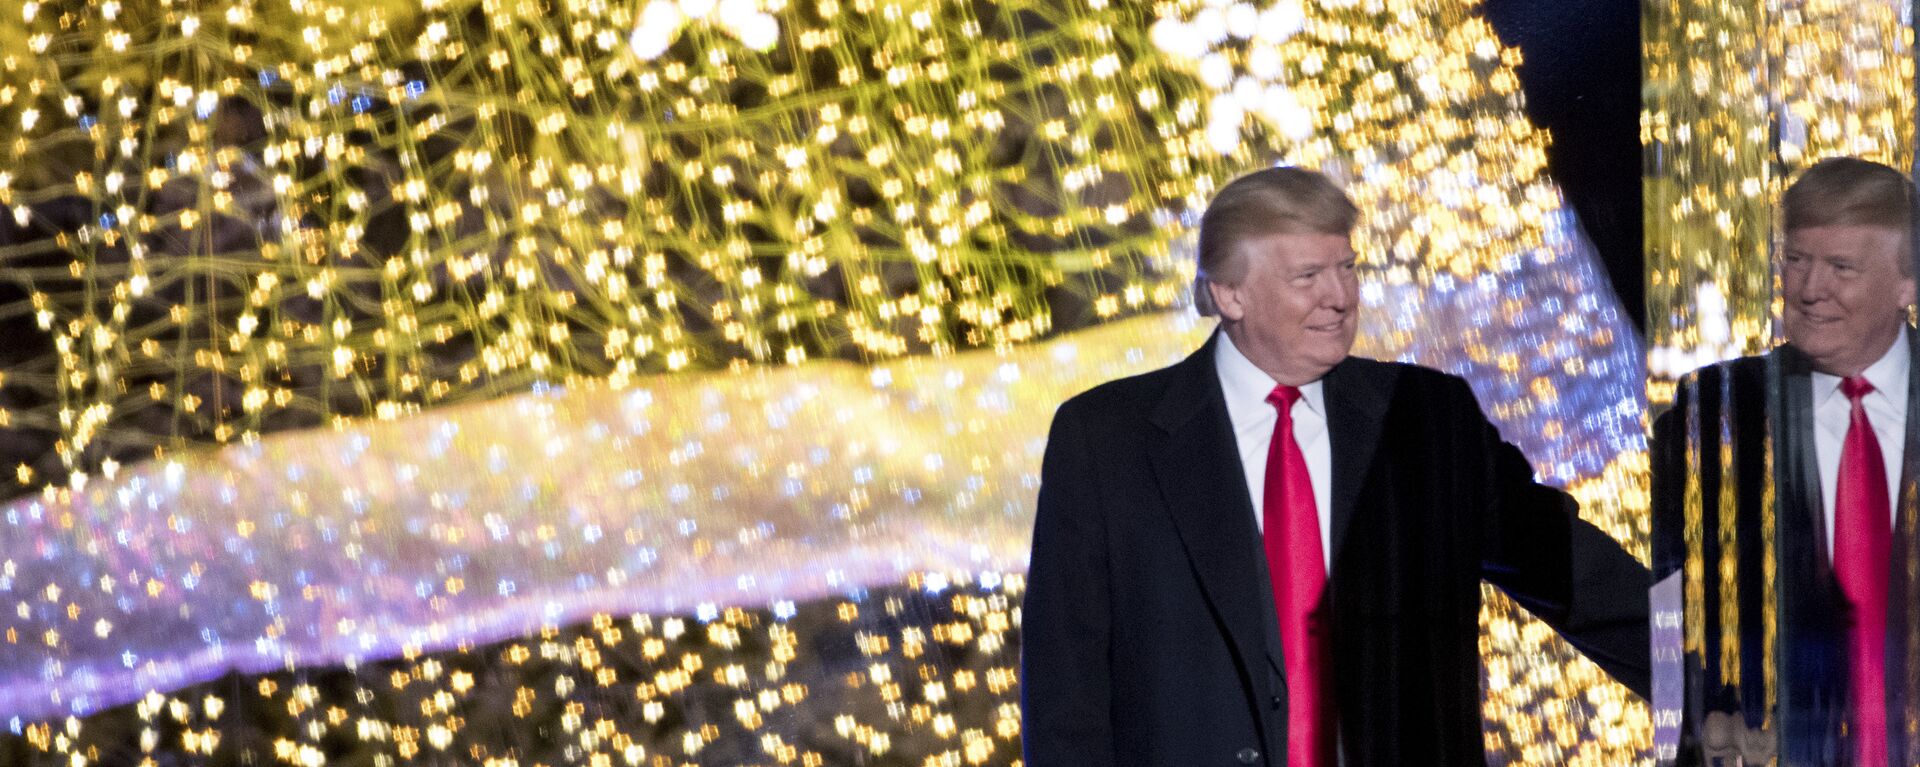 President Donald Trump stands on stage after lighting the 2017 National Christmas Tree on the Ellipse near the White House, Thursday, Nov. 30, 2017, in Washington. - Sputnik International, 1920, 09.12.2021